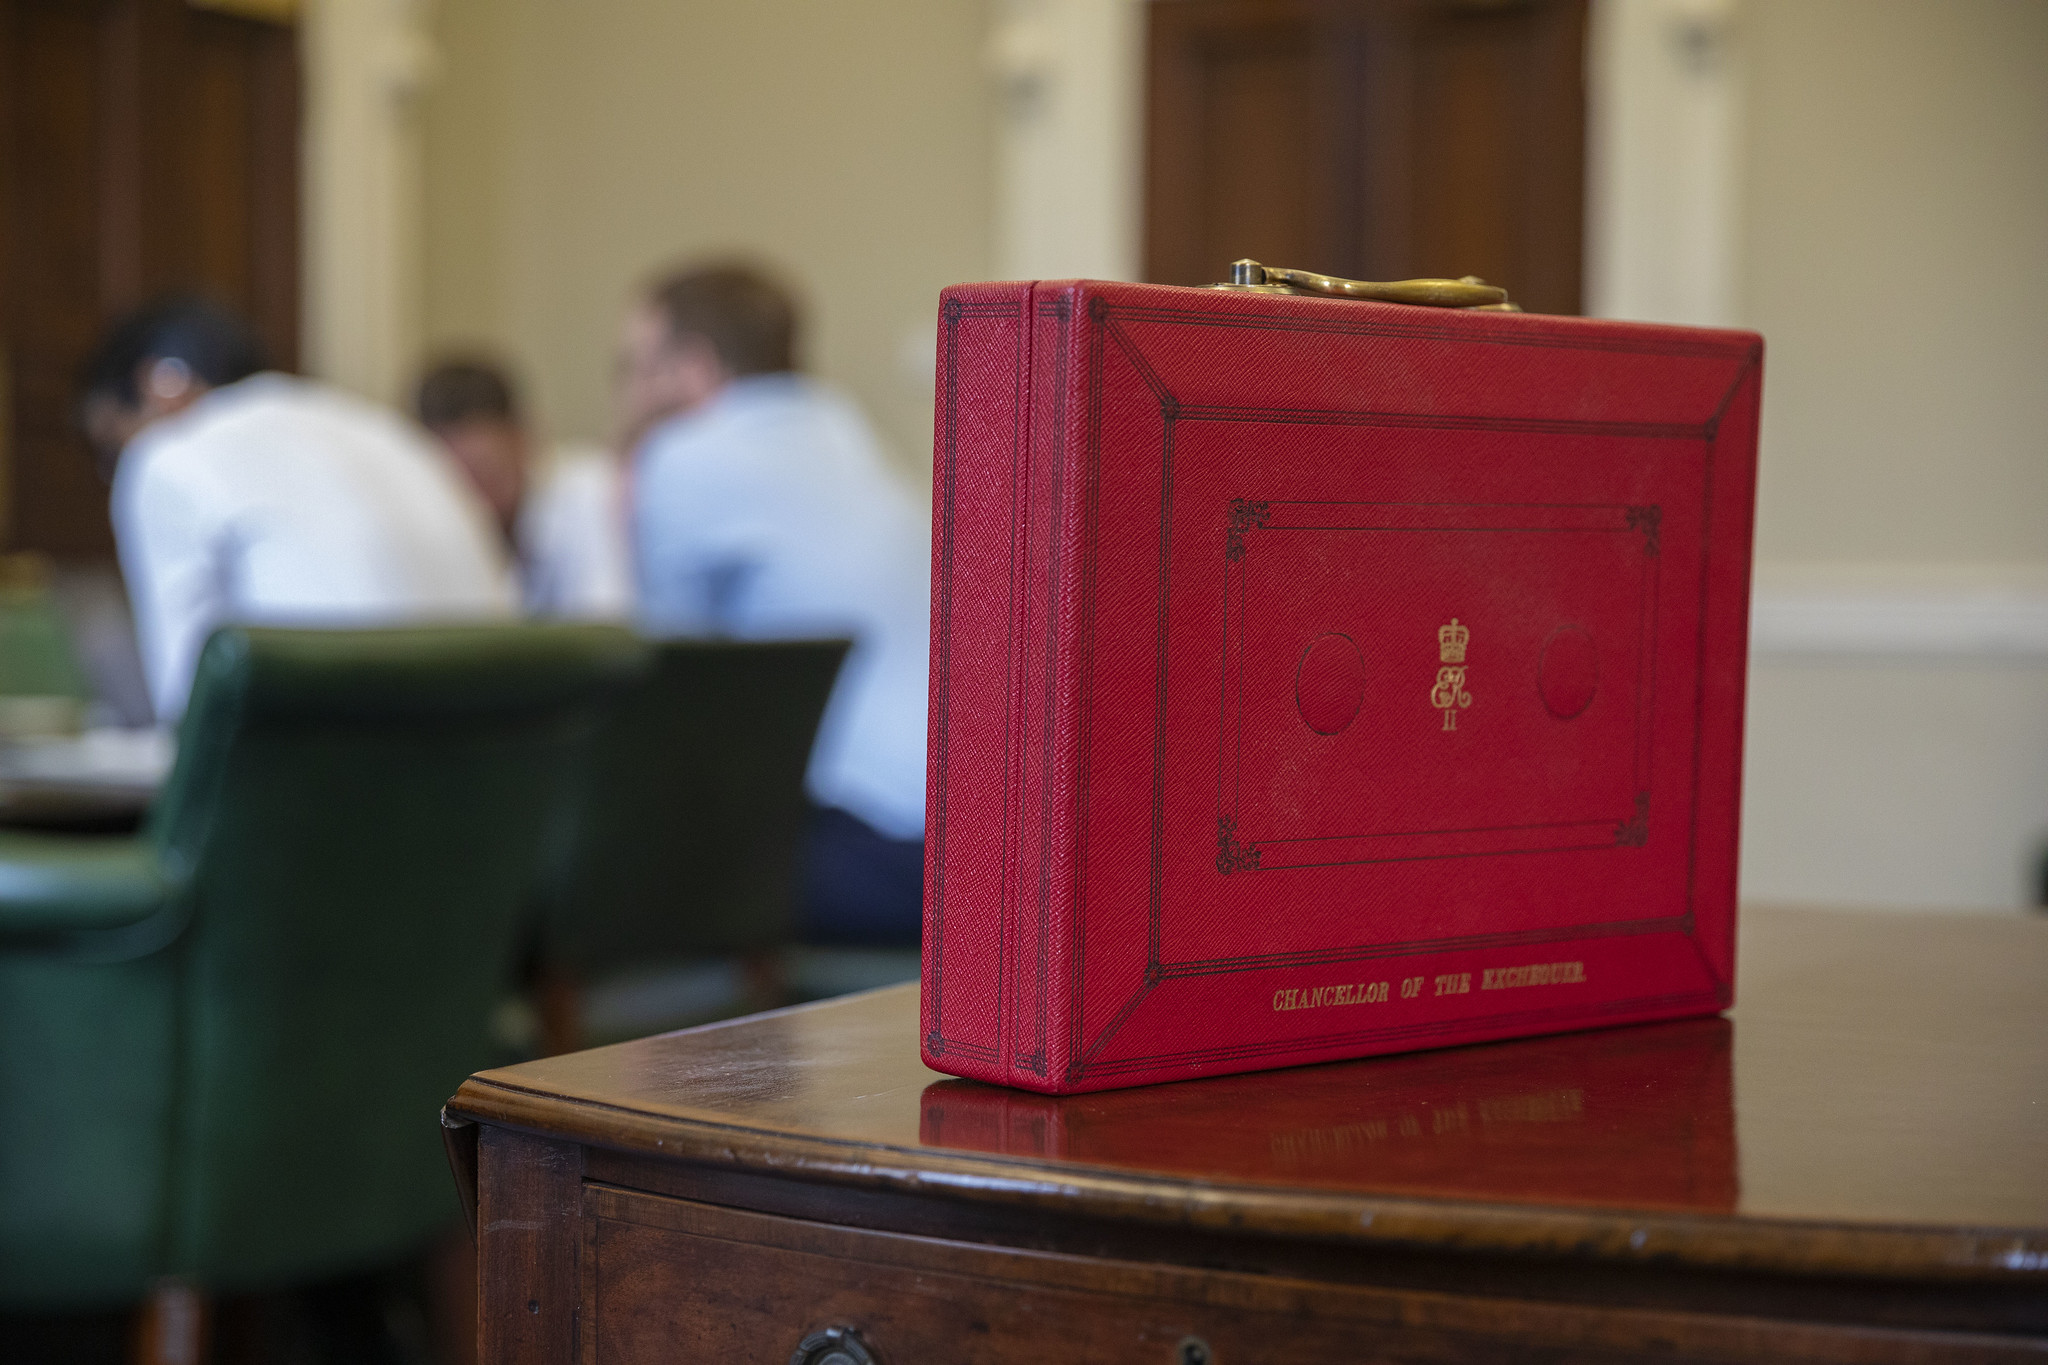 Chancellor of the Exchequer's red briefcase sits on a desk